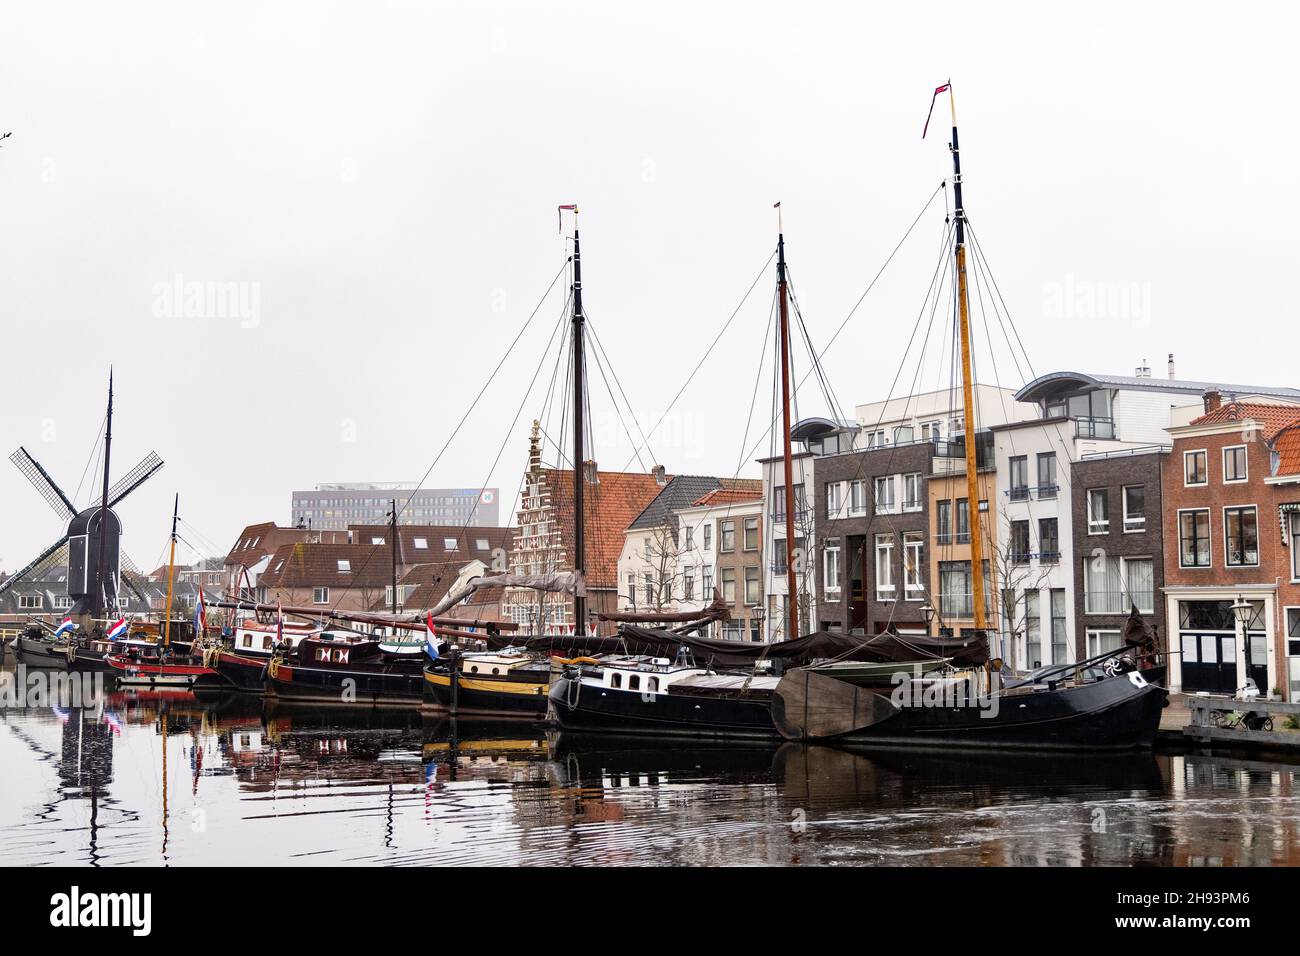 Historic boats and buildings on the Kort Galgewater on the Rhine River in Leiden, Netherlands. The Molen de Put windmill is in the background. Stock Photo